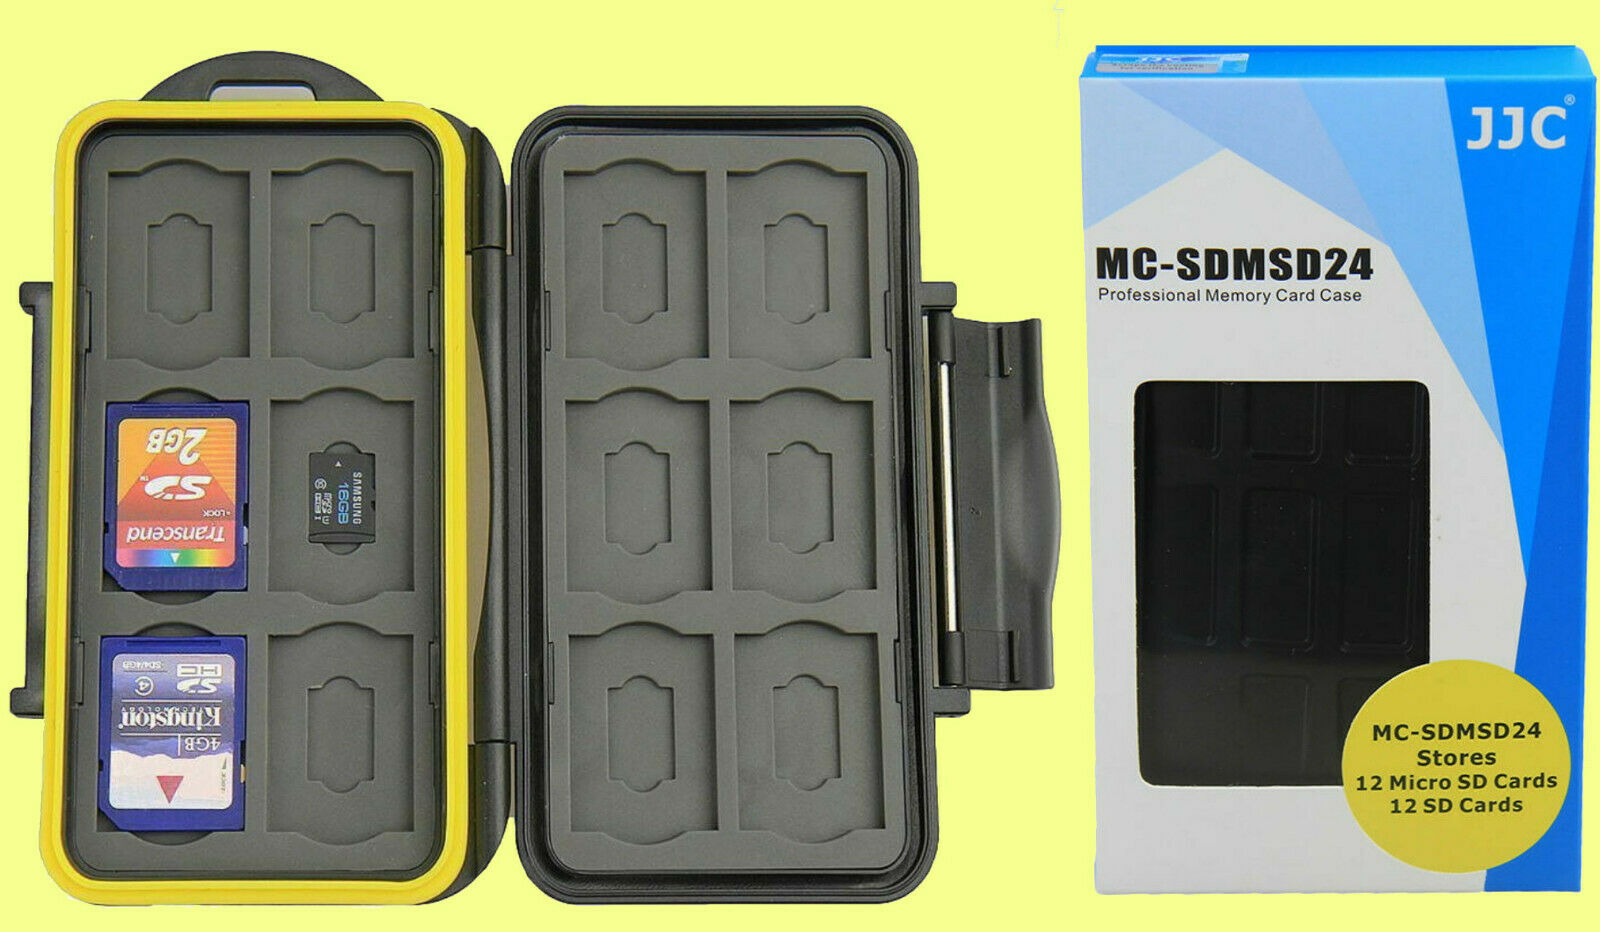 Jjc Waterproof Water-resistant Case Holder Storage To> 24:12 Sd+12 Micro Sd Card